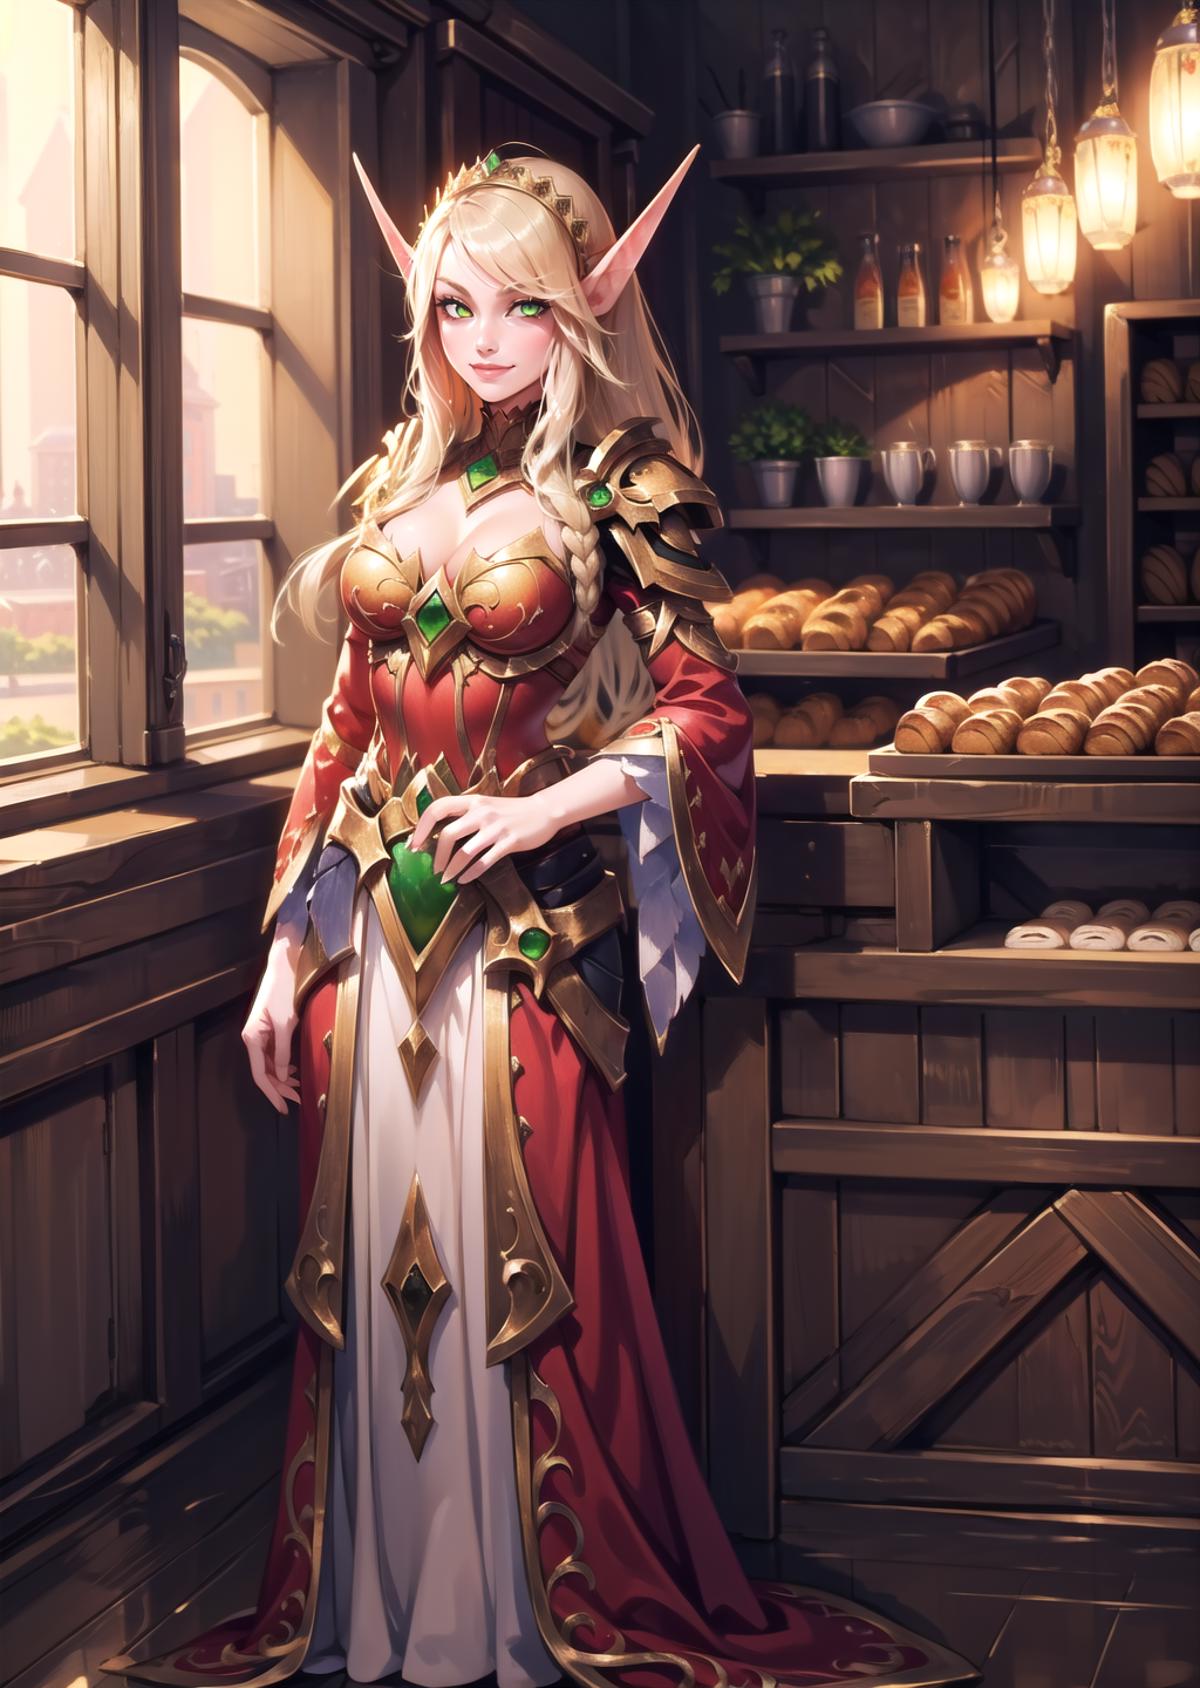 Blood Elves image by Barons